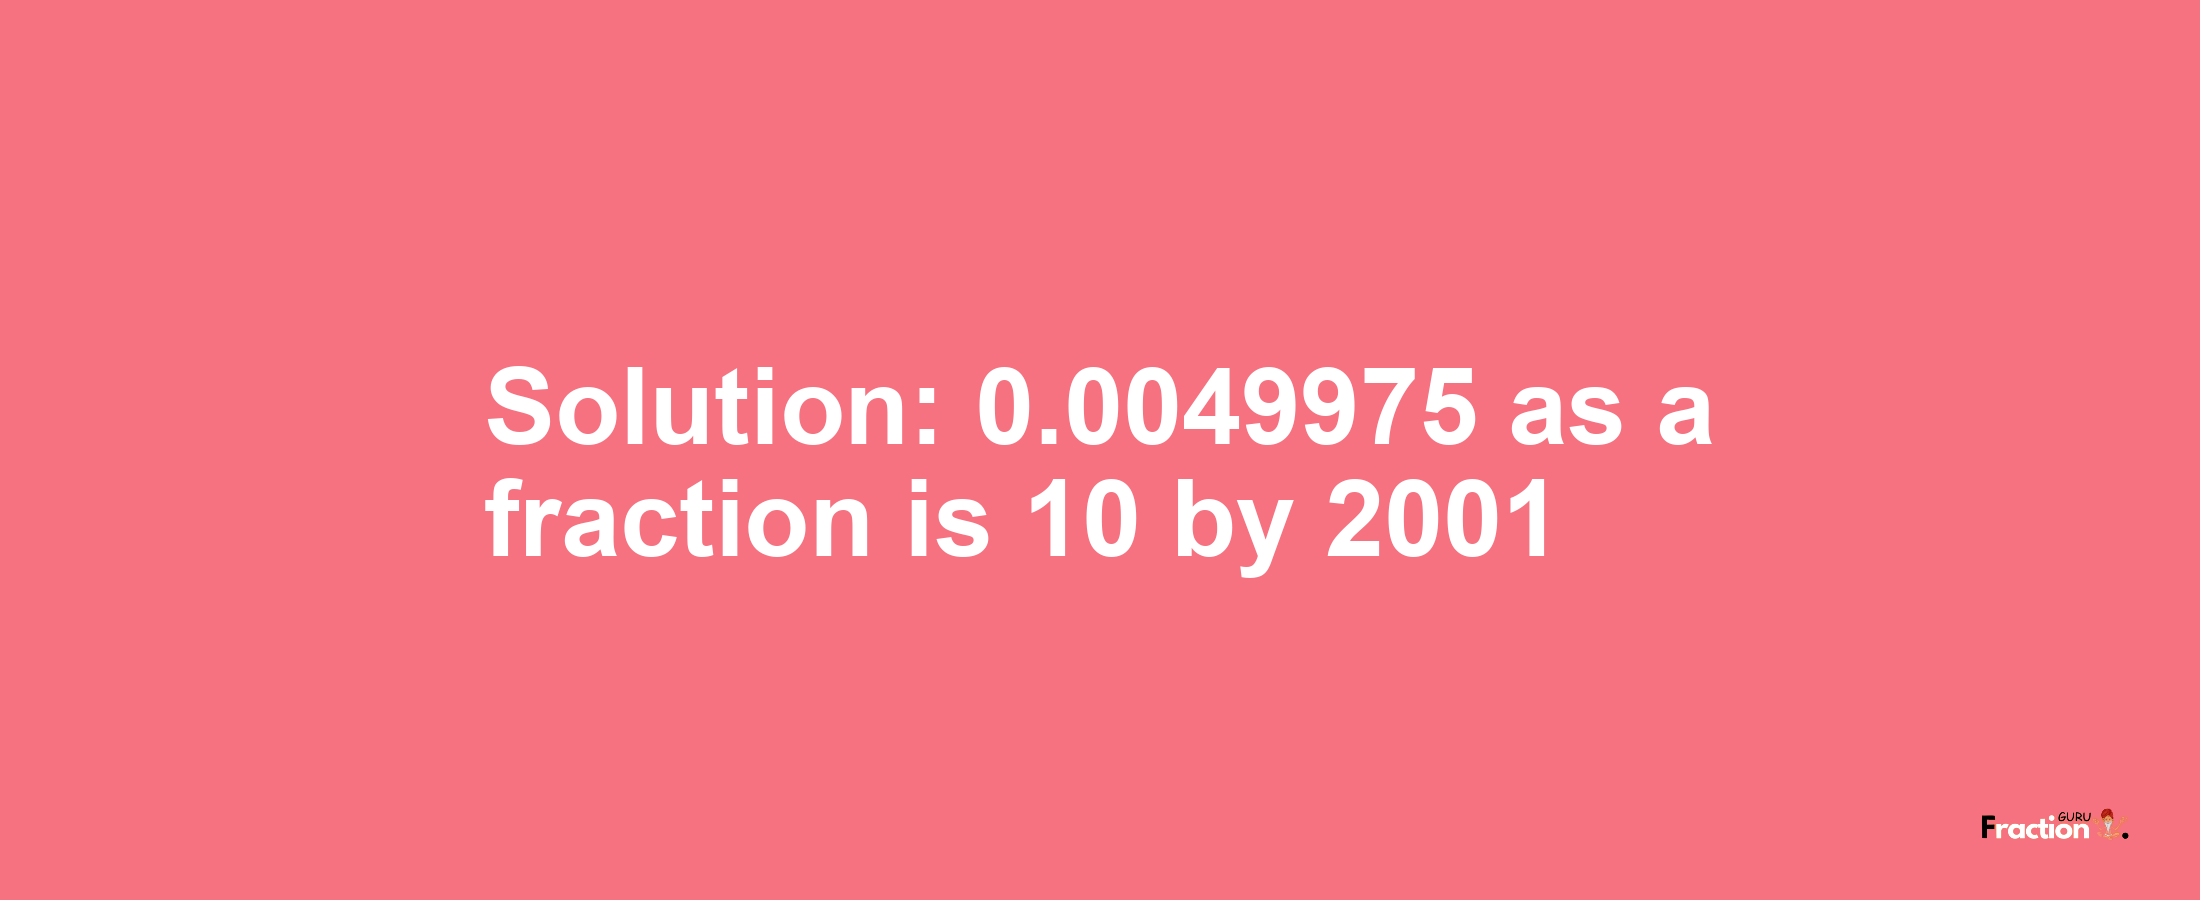 Solution:0.0049975 as a fraction is 10/2001